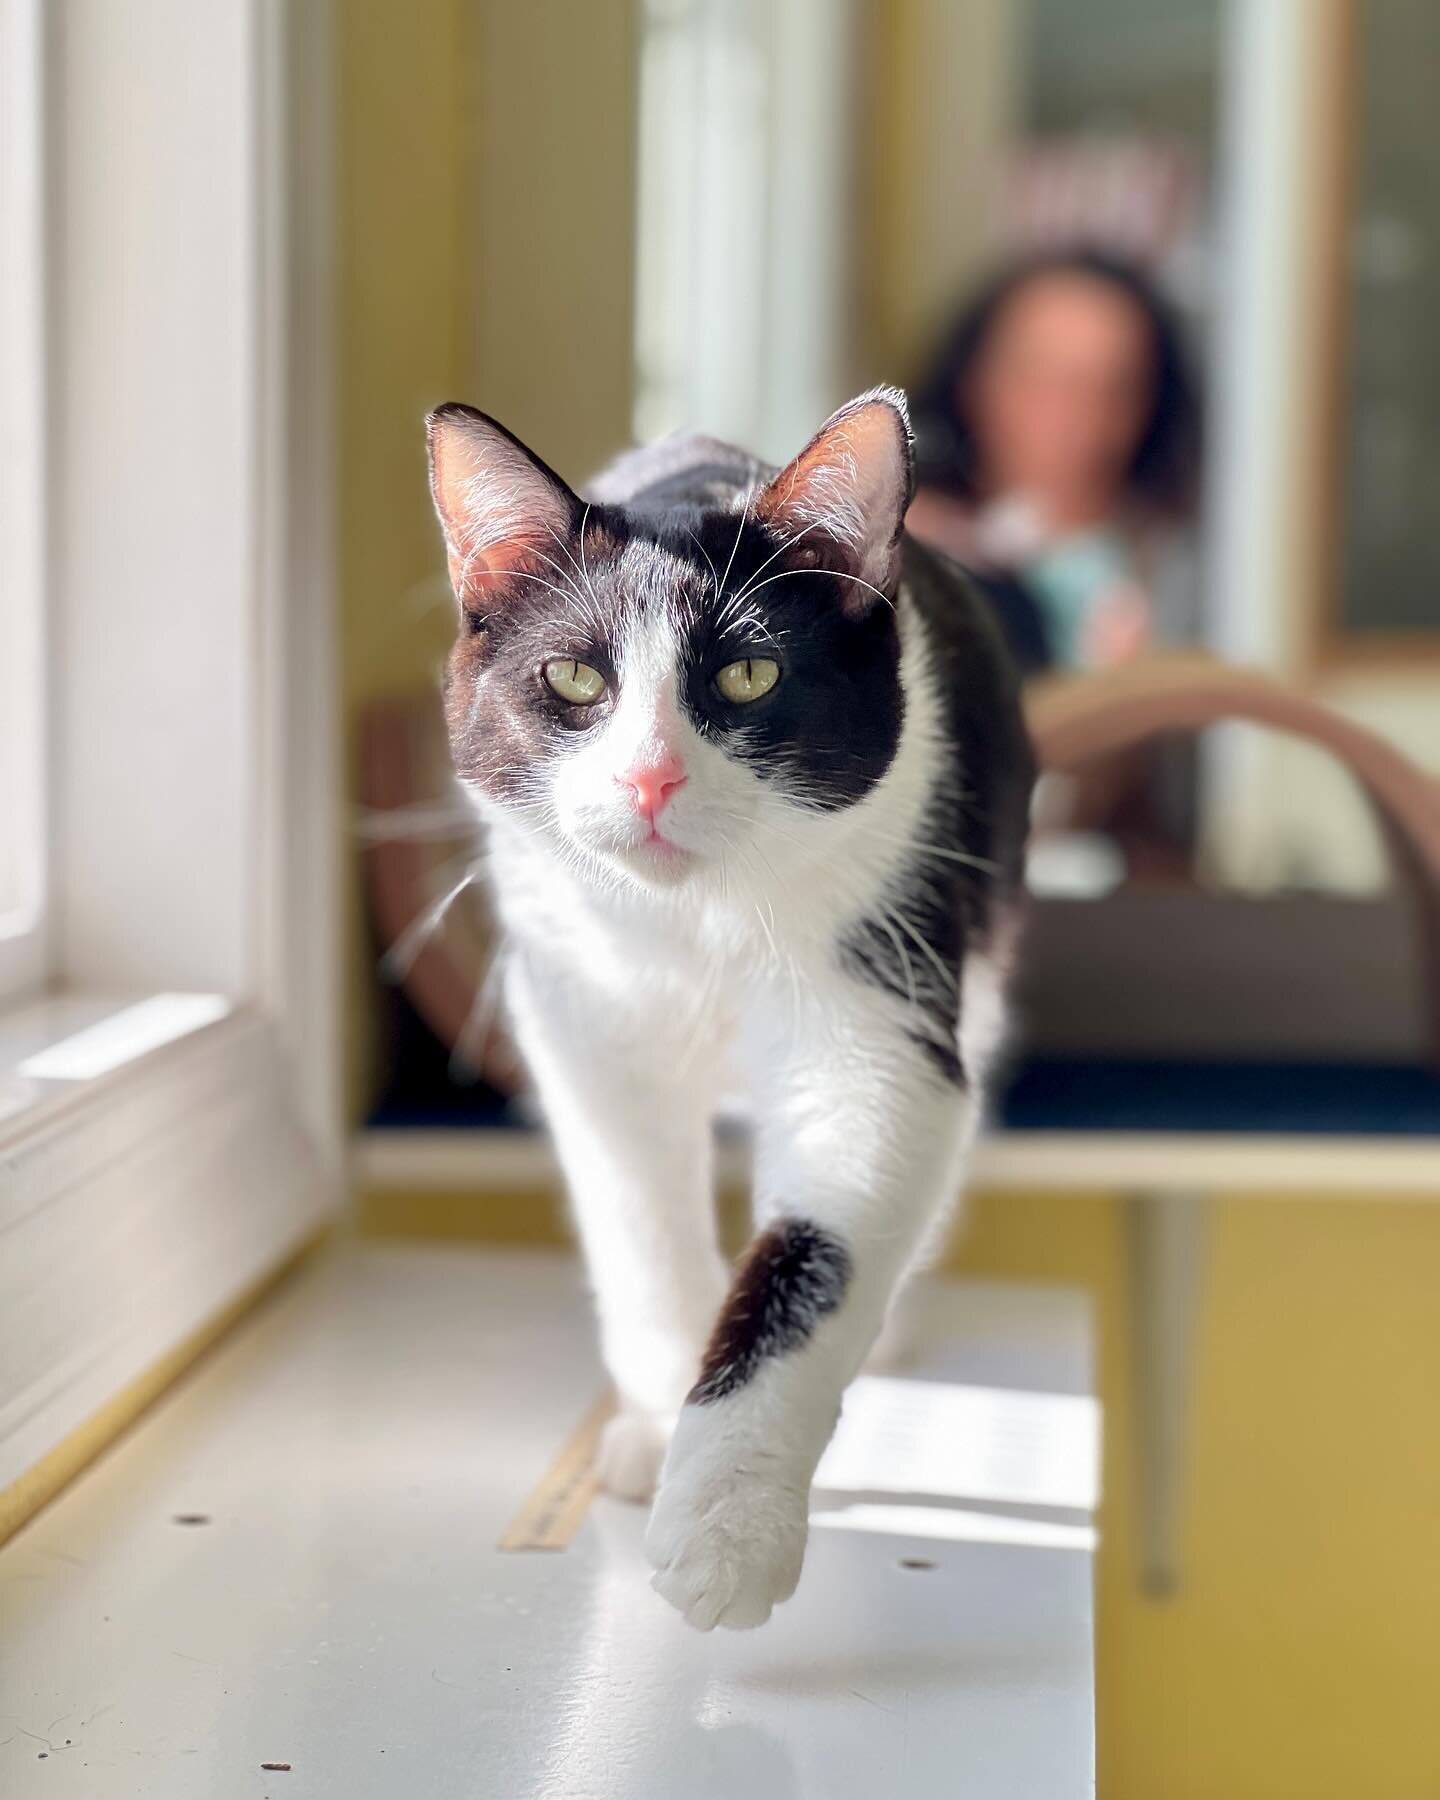 Chase struts hit stuff imprinting paw prints from the catwalk straight to your heart! Swing by the Redwood Coast Humane Society today, Saturday 12-2pm, to meet Chase and, who knows, maybe you&rsquo;re his purrfect forever peep! 💞🐾